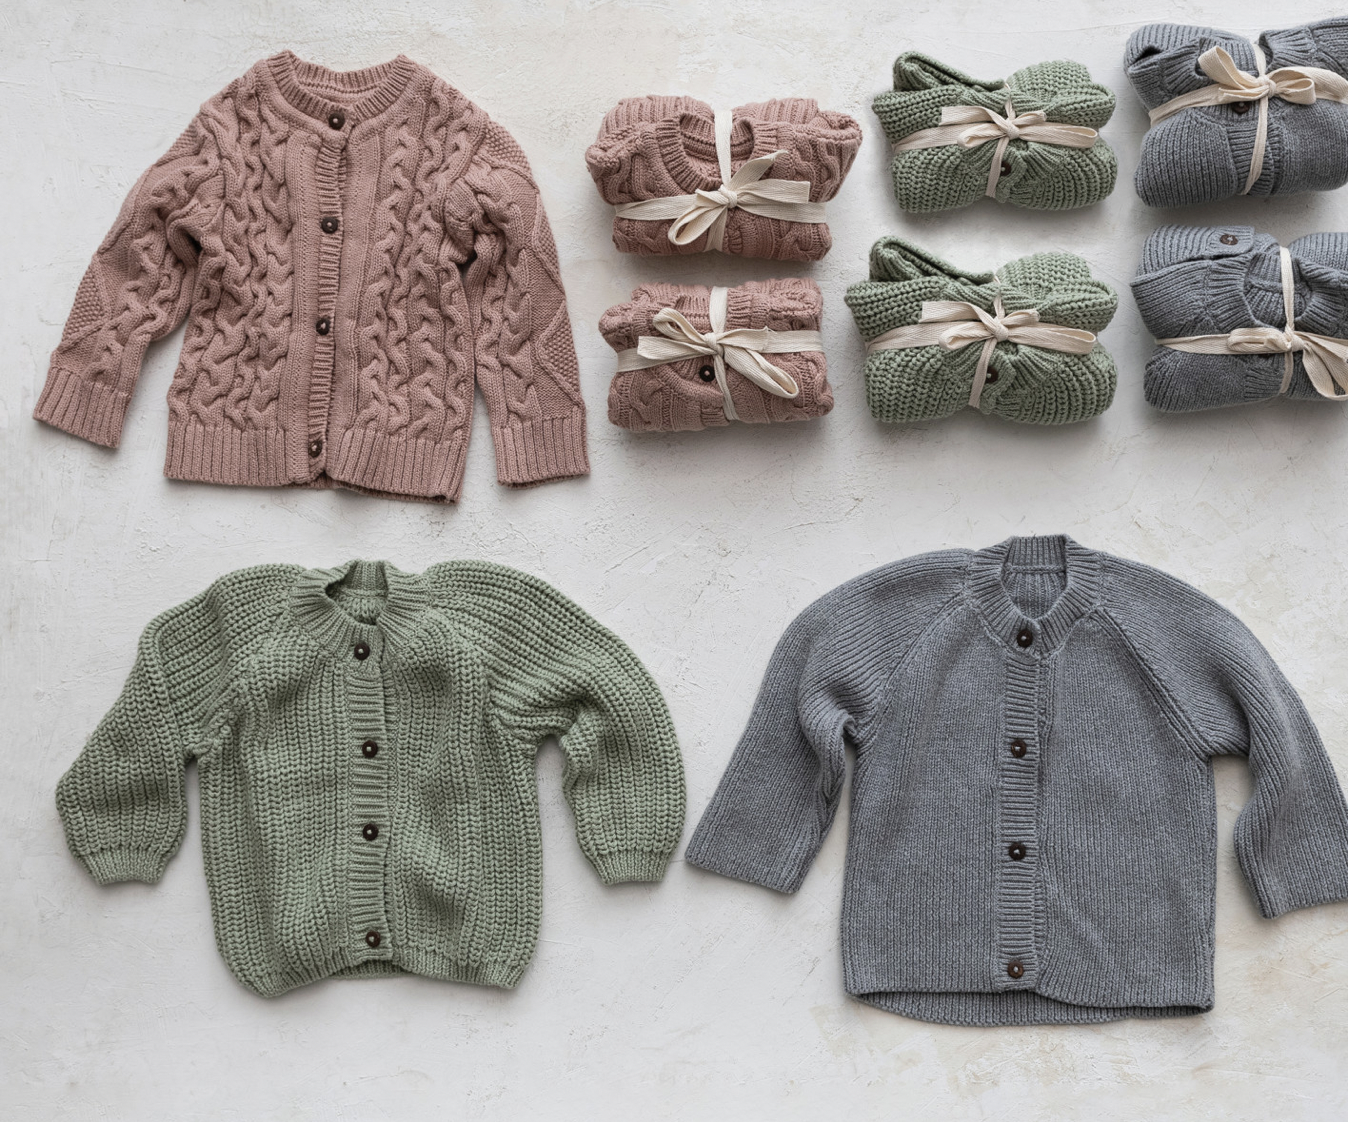 Cotton Knit Baby Sweater w/ Wood Buttons